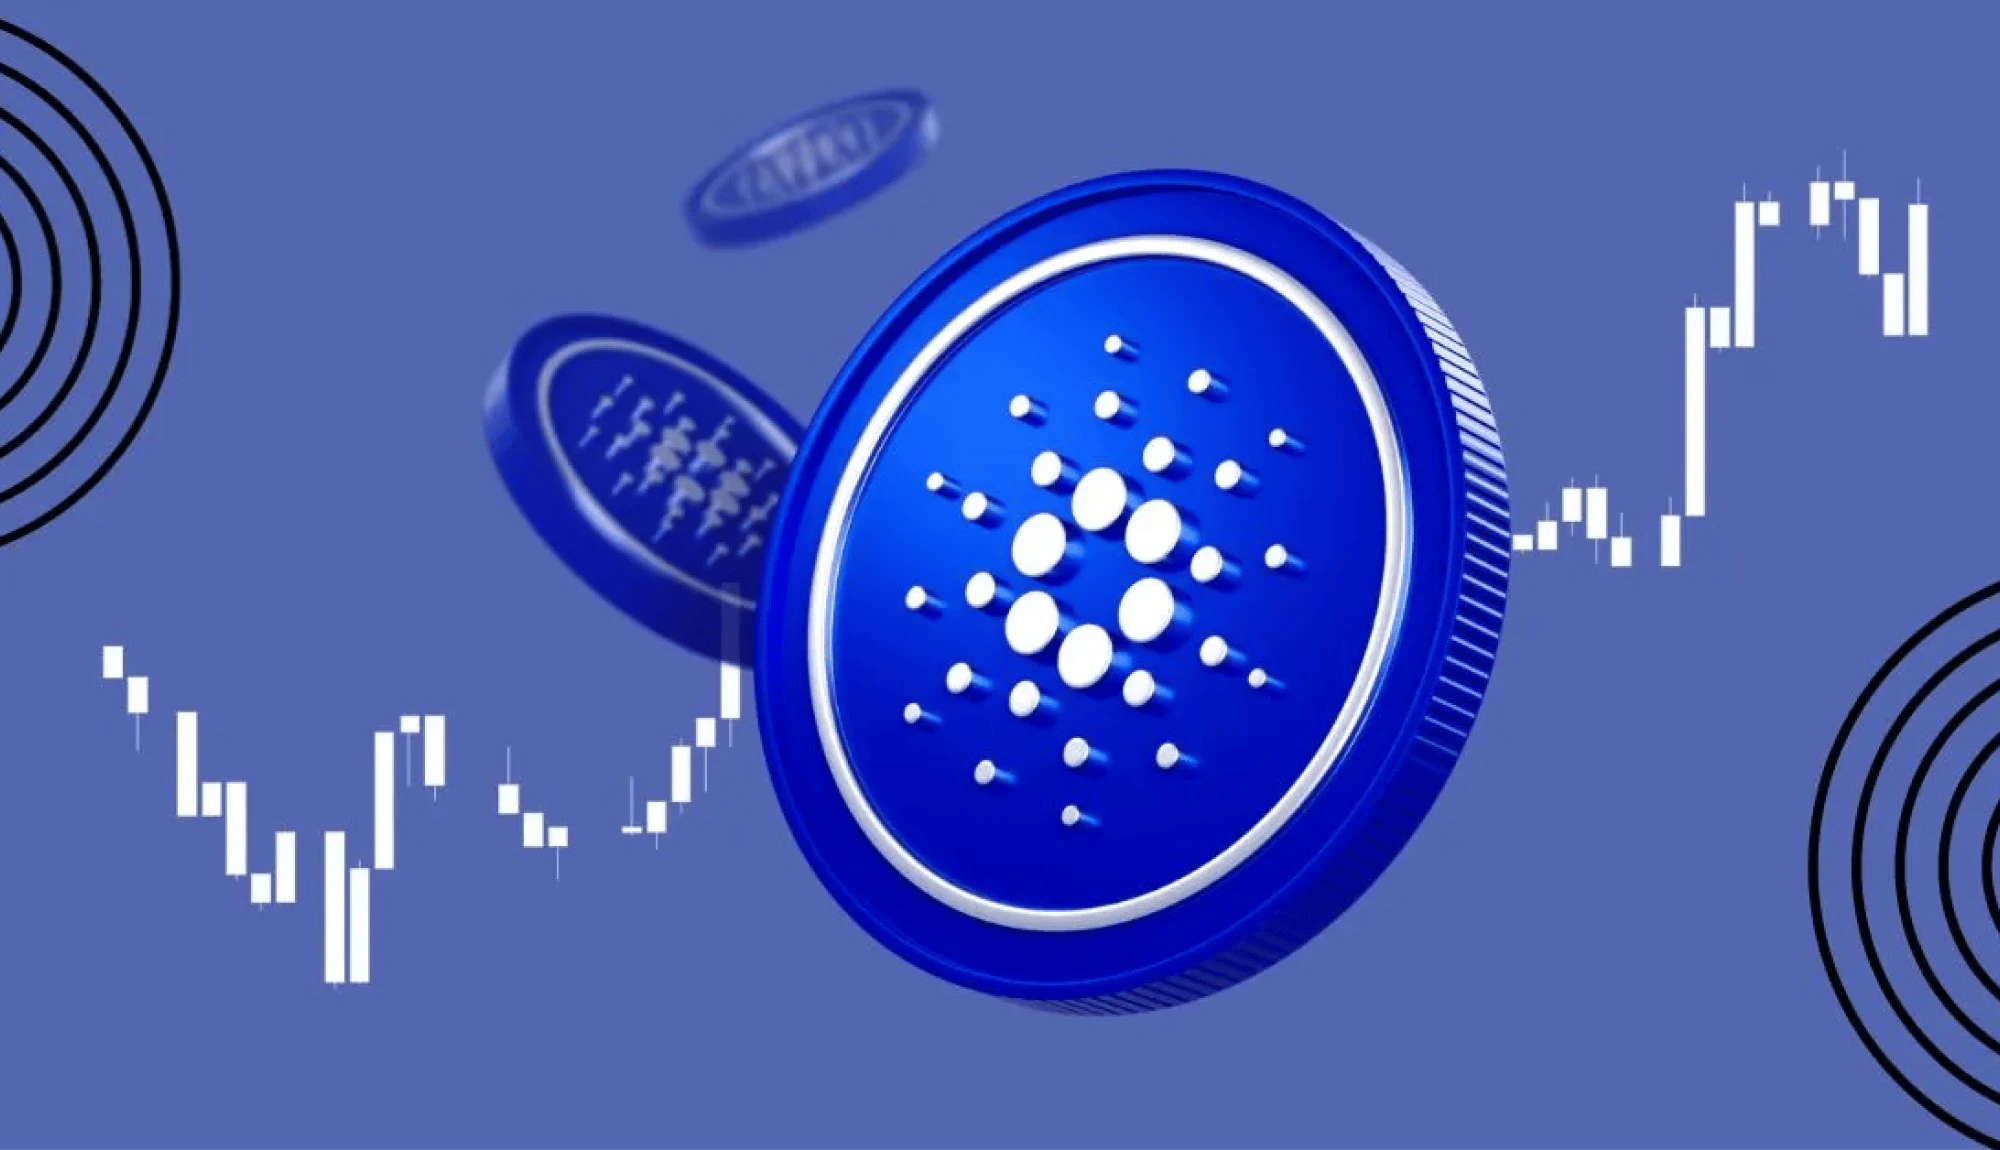 5-Year Insight: Cardano's Robust HODL Strategy